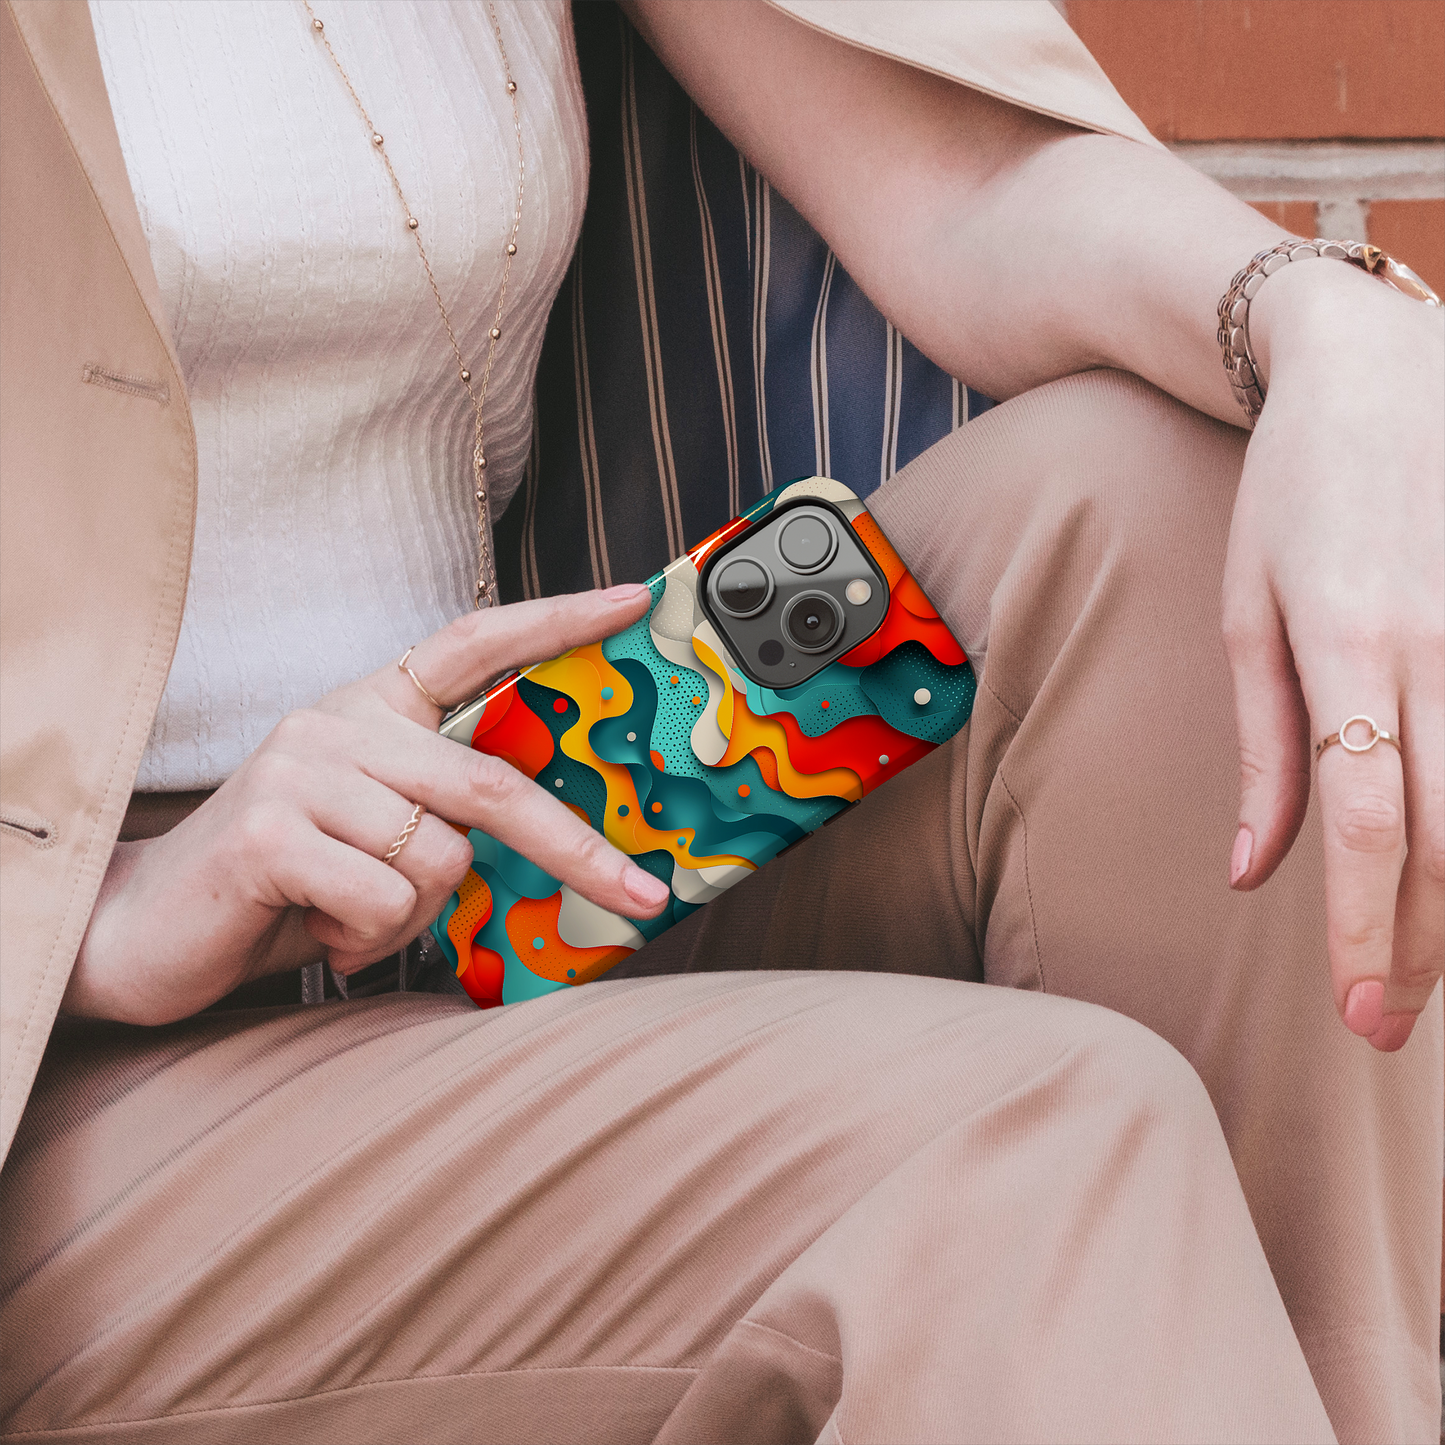 Wavy Whimsy (iPhone Case 11-15)Elevate your iPhone's protection and style with RimaGallery's Colorful, layered wavy design with a playful touch On case, featuring dual-layer defense and a sleek, gRimaGallery